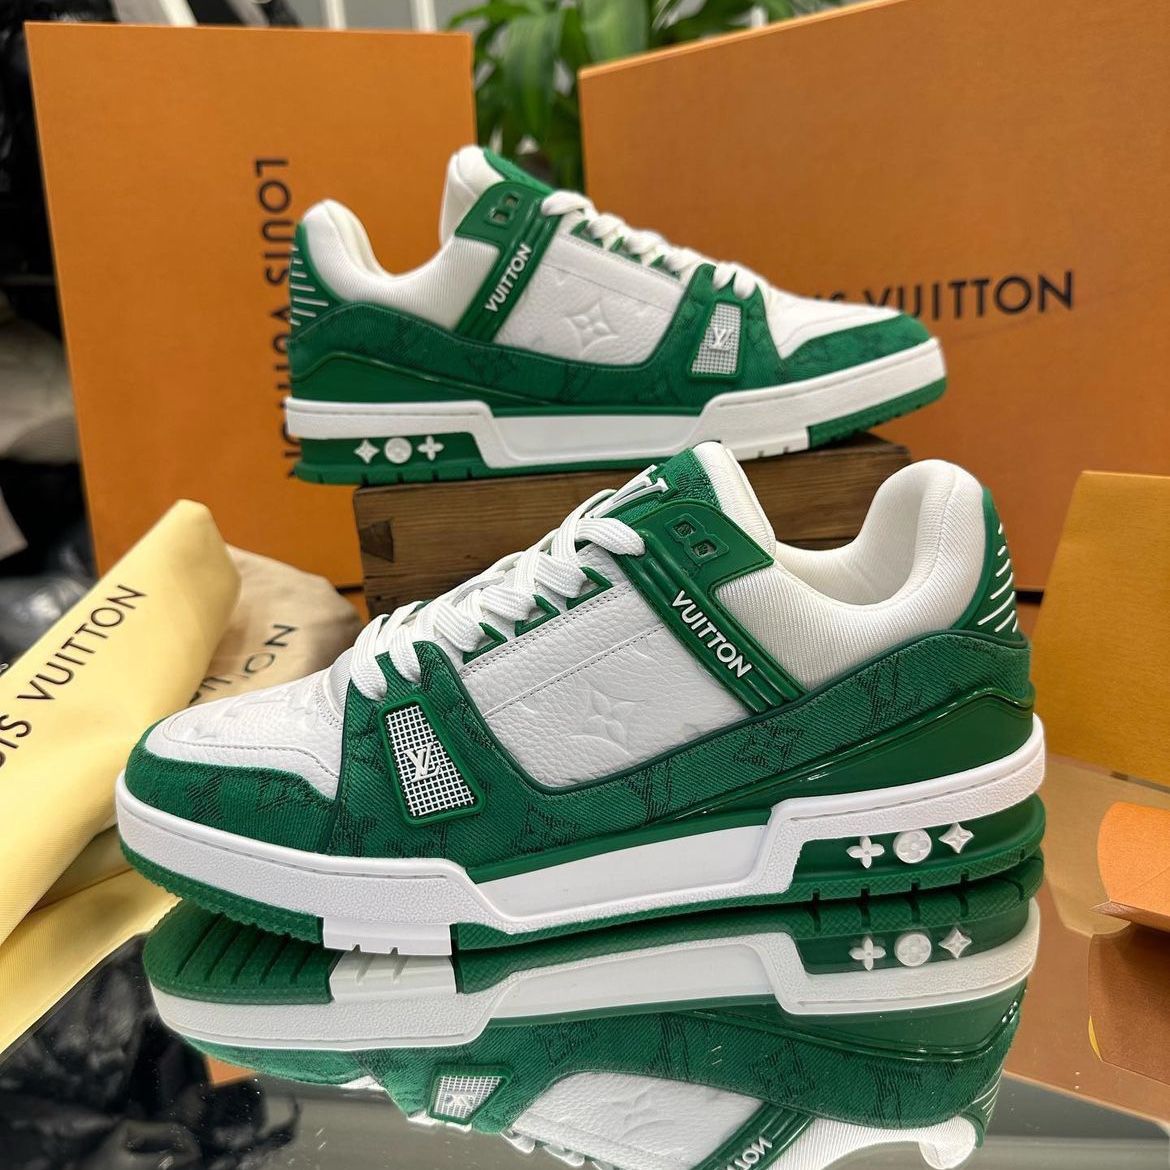 Louis Vuitton Luxembourg Sneaker for Sale in Bothell, WA - OfferUp